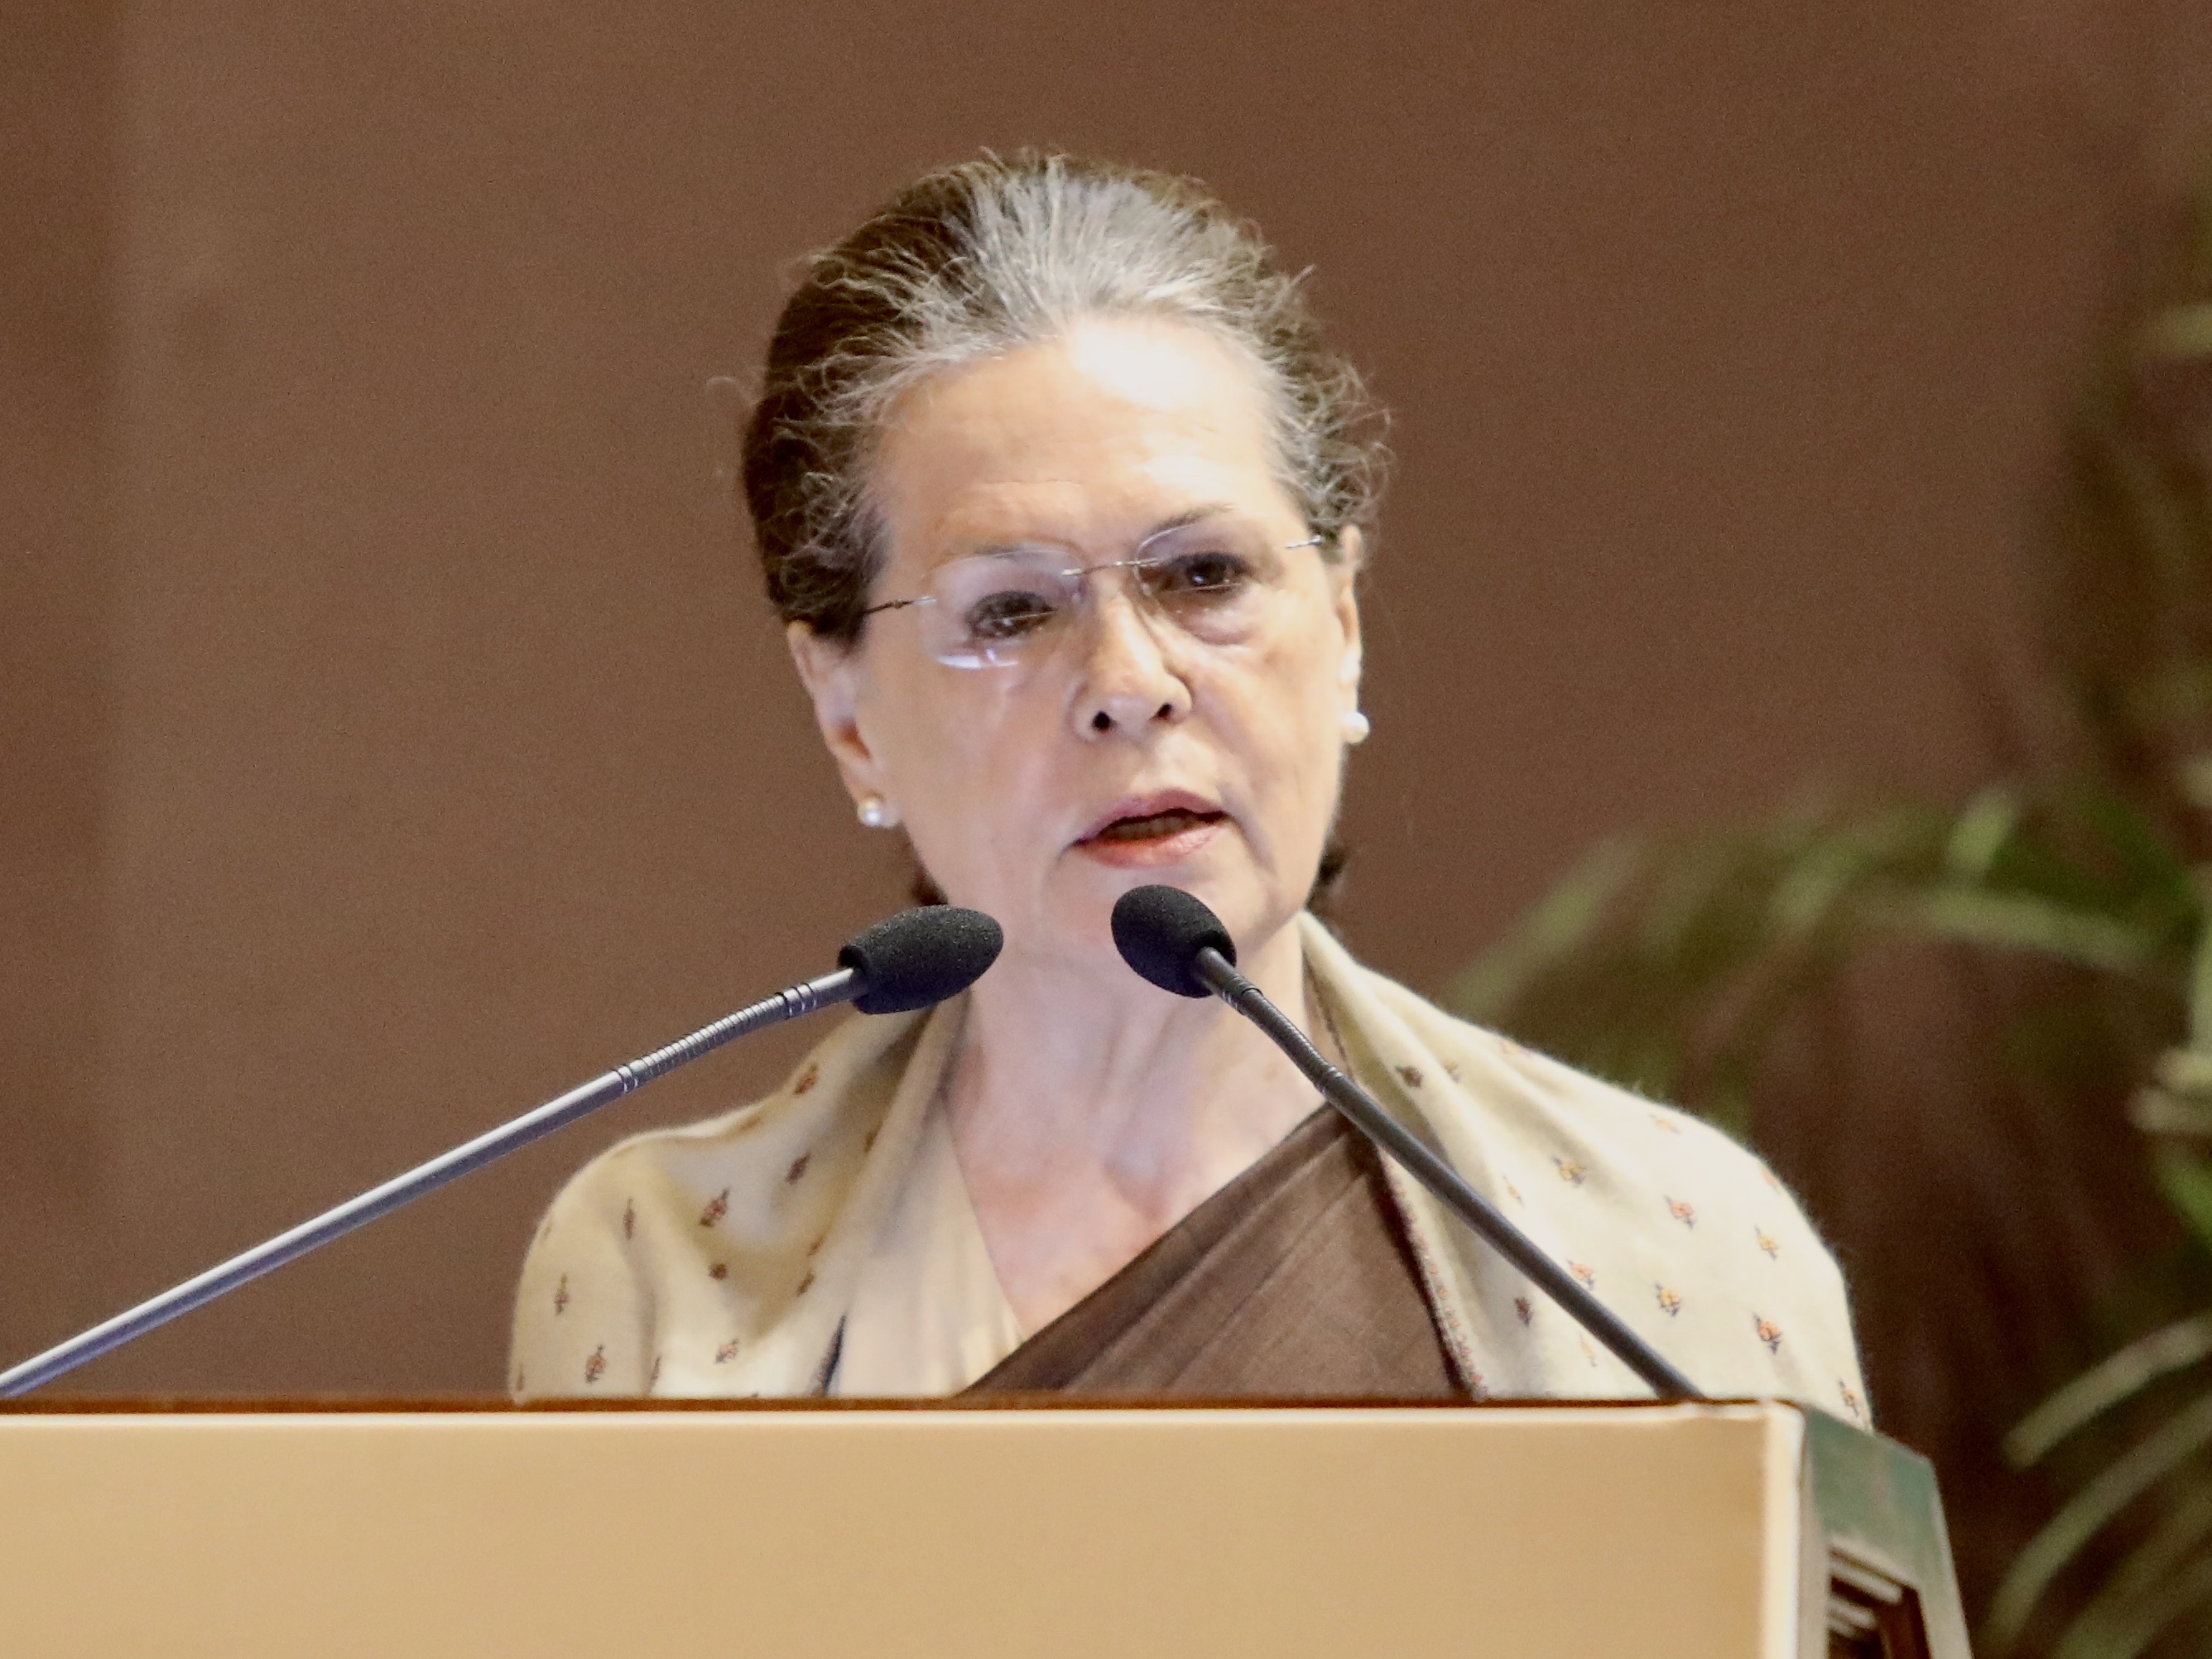 Sonia Gandhi seeks transfer of Rs 7,500 per month to every family for the next 6 months